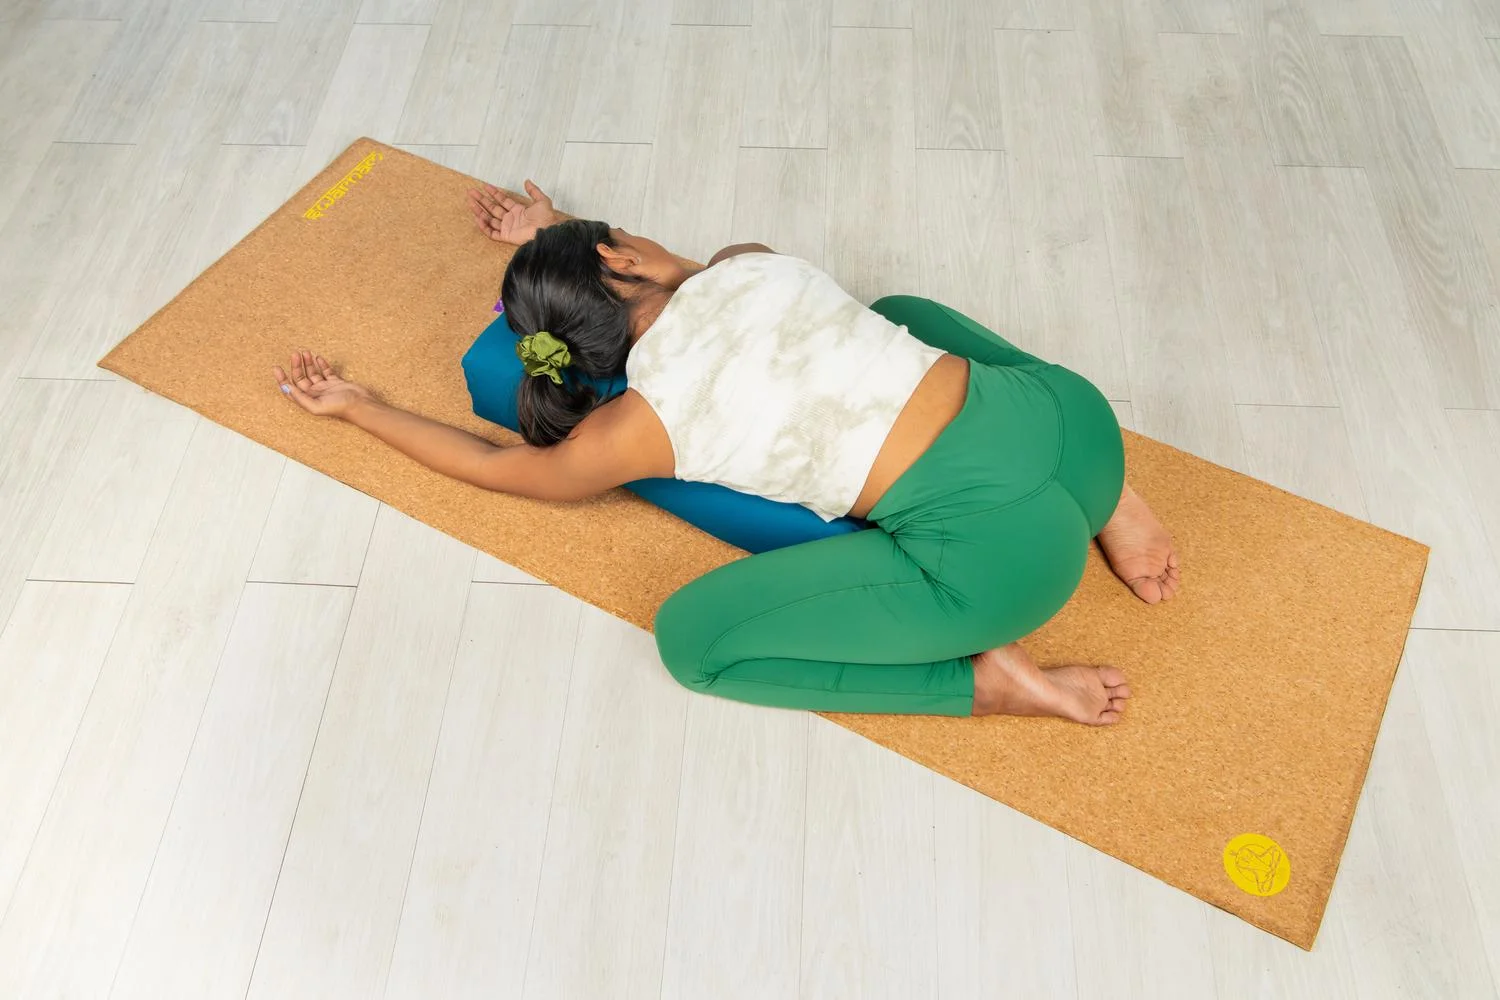 yoga-being-perfomed-on-juru-yoga-mats-that-are-ecofriendly-recyclable-renewable-yoga-mat